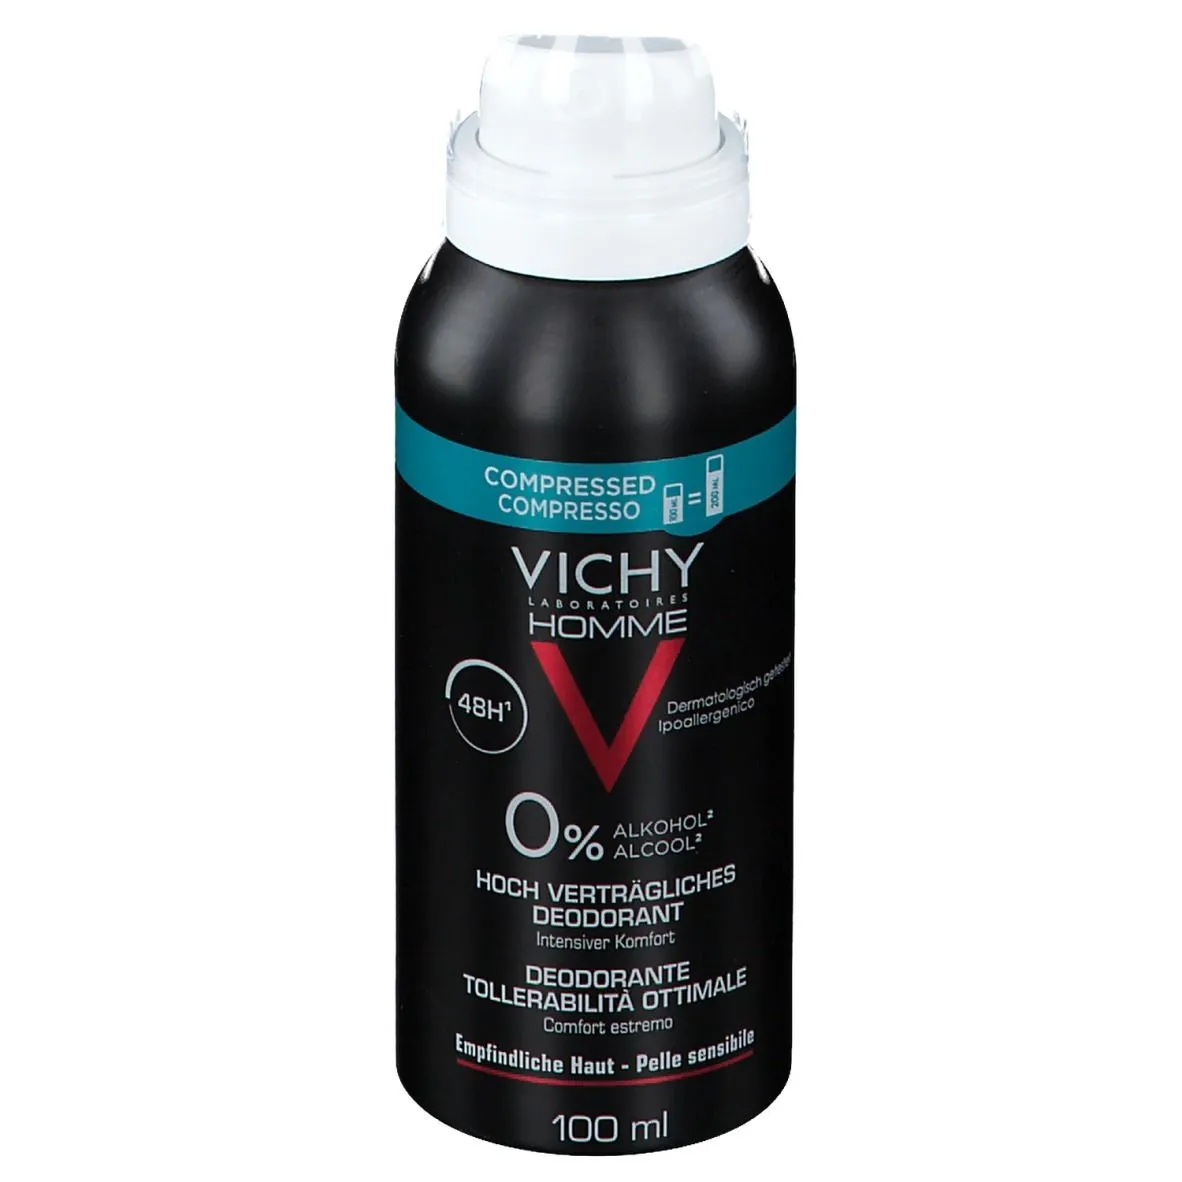 Vichy Homme Deo Sensitive Compressed 100 ml 48 h